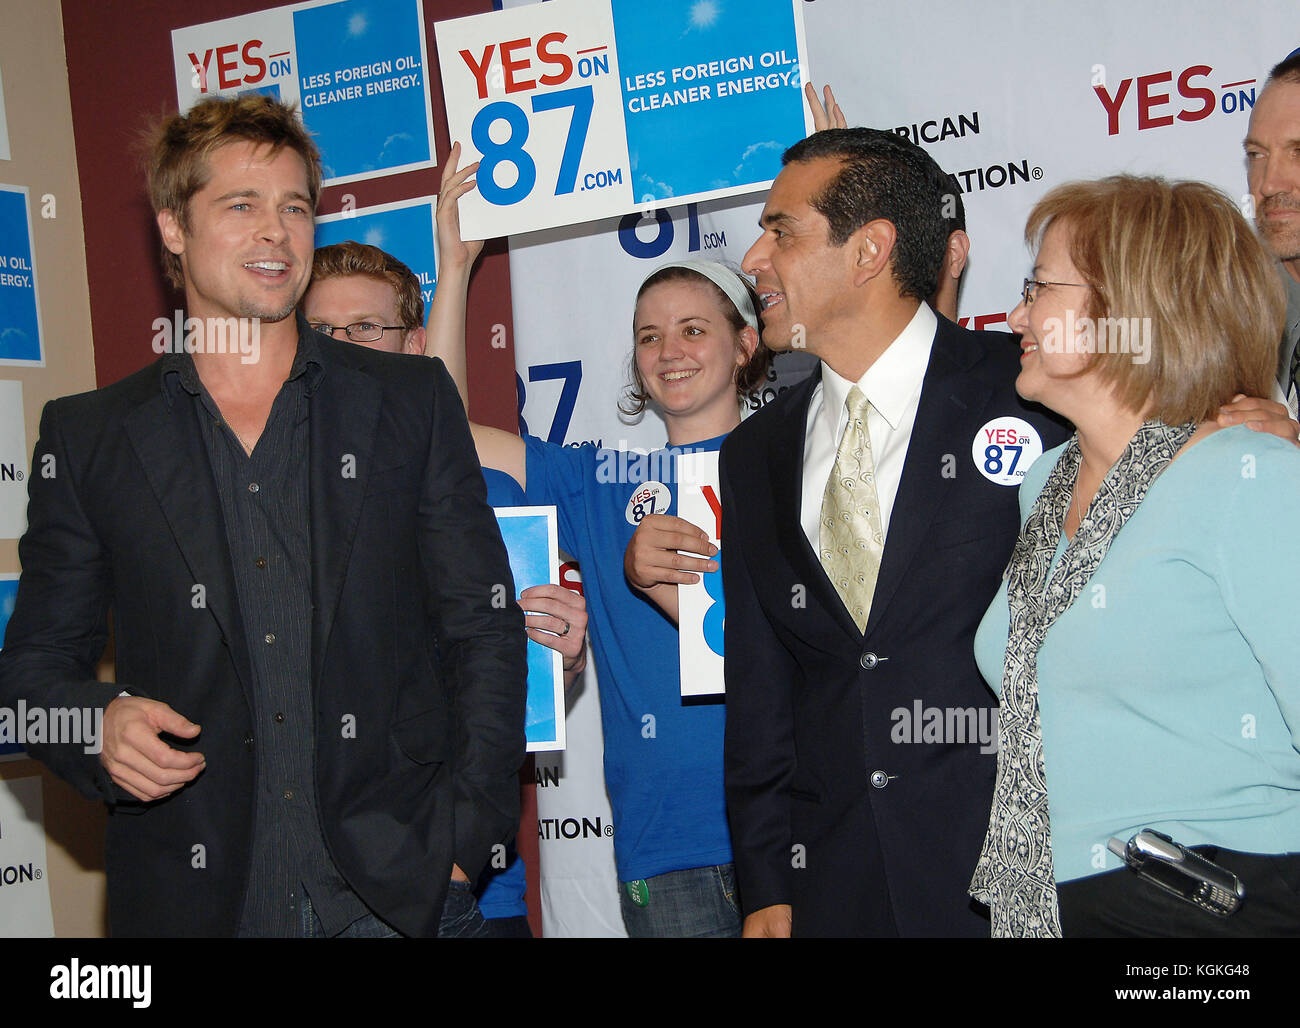 Brad Pitt and Los Angeles mayor Antonio Villaraigosa  at the L.A. Labor Headquarters for a get out and vote YES on 87.  headshot full length smile Brad Pitt 013  = Brad Pitt attending, People, Vertical, USA, Los Angeles, Actor, Film Premiere,  Photography, Red Carpet Event, Brad Pitt - Actor, Arts Culture and Entertainment, , Celebrities, Stock Photo